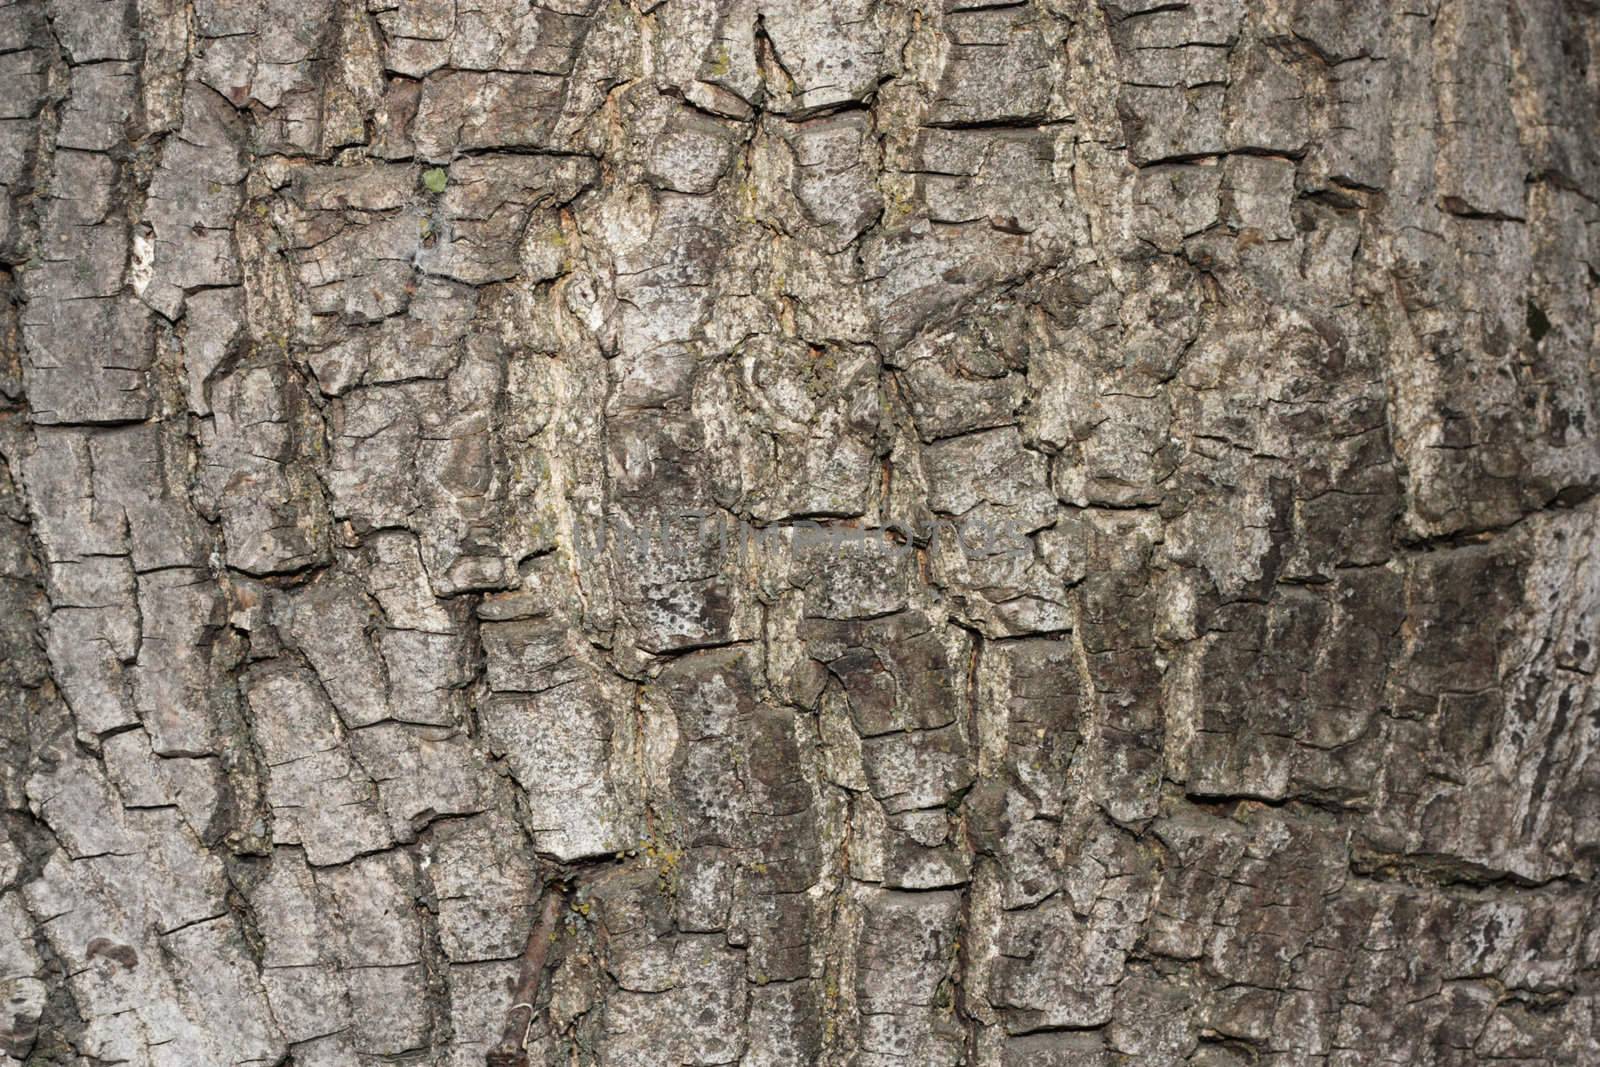 Texture shot of brown tree bark, filling the frame  by schankz